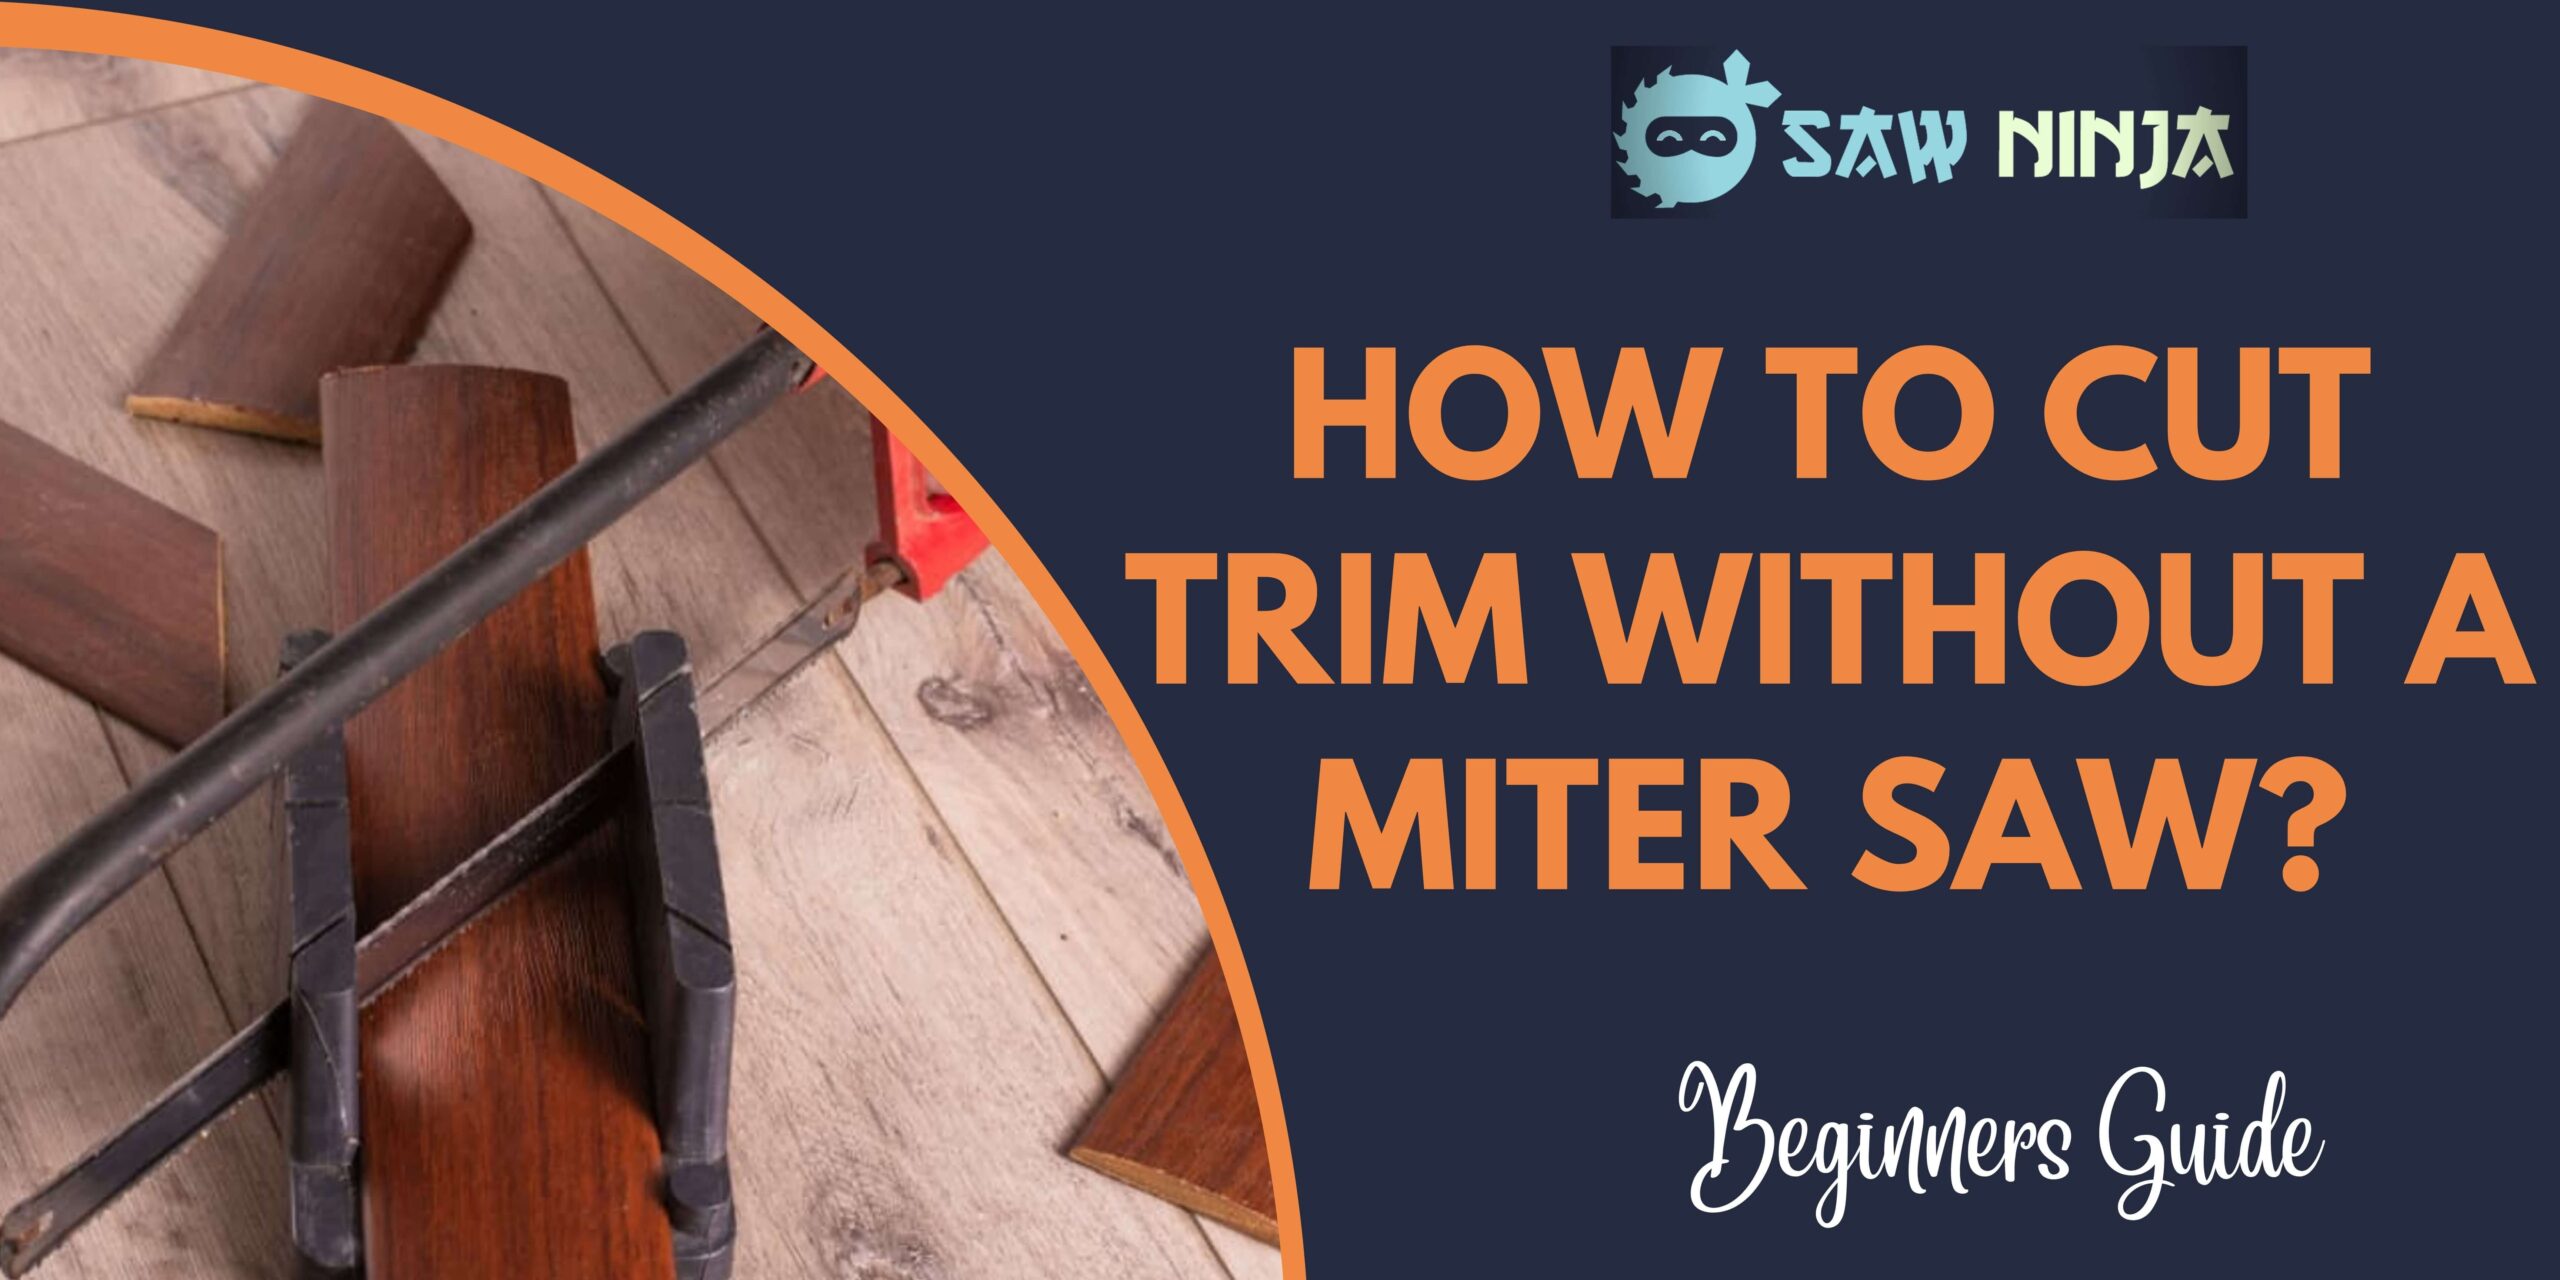 How To Cut Trim Without a Miter Saw